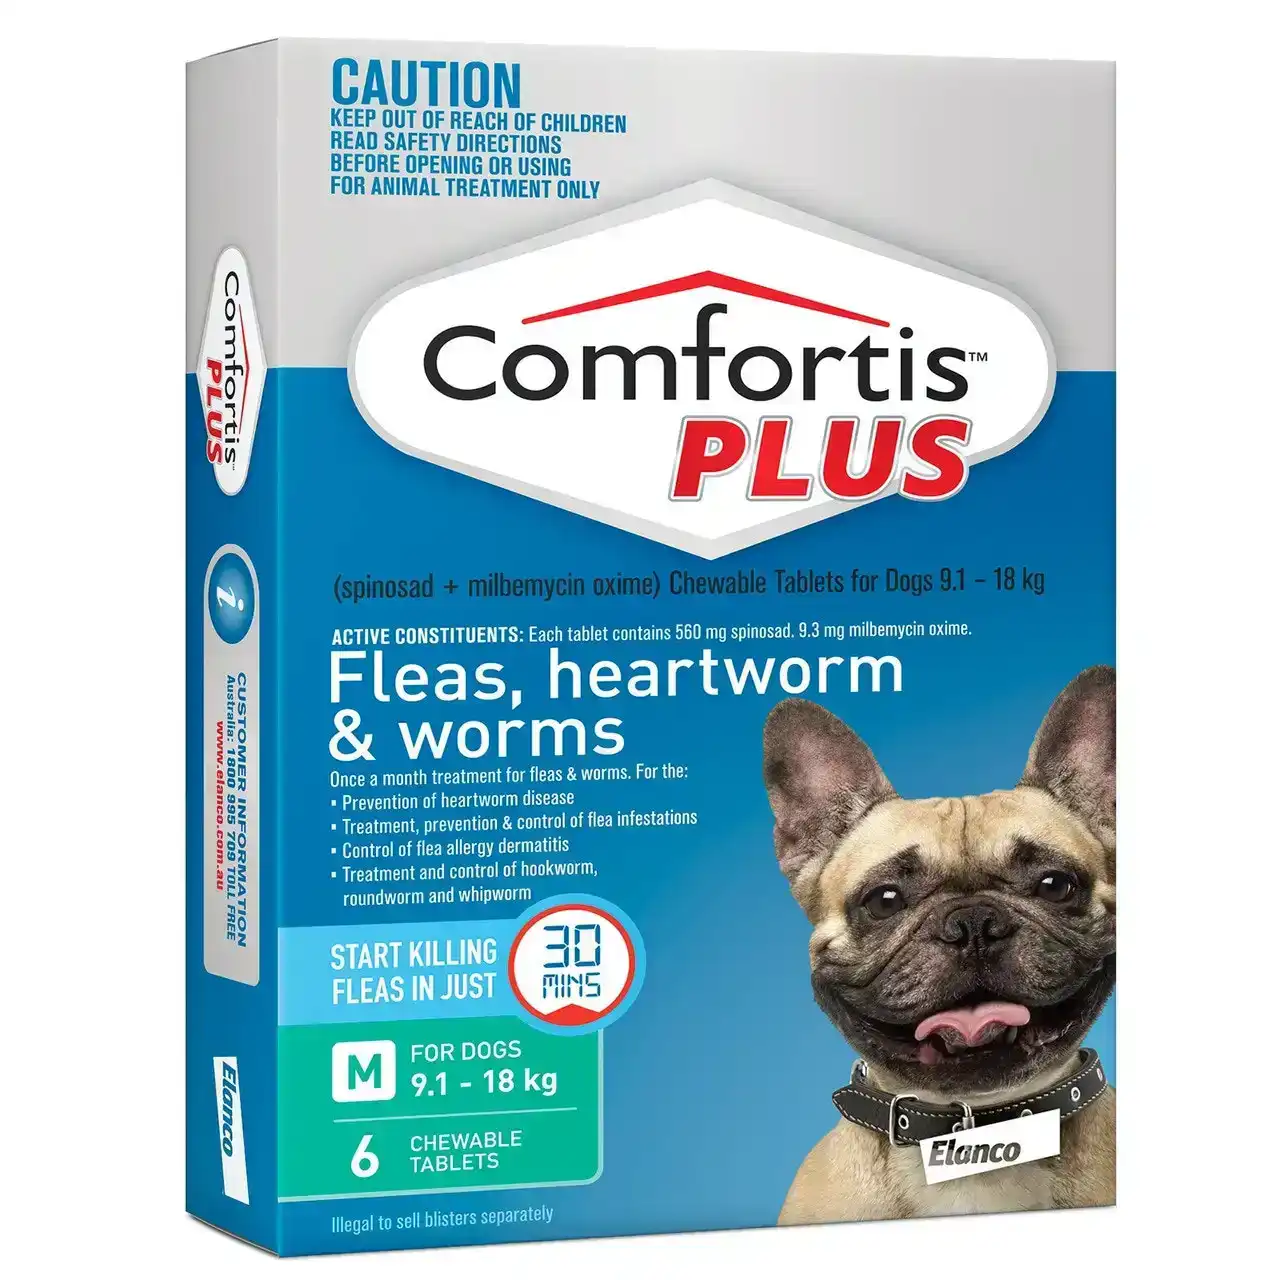 Comfortis Plus for Dogs 9.1 - 18kg 6 Pack